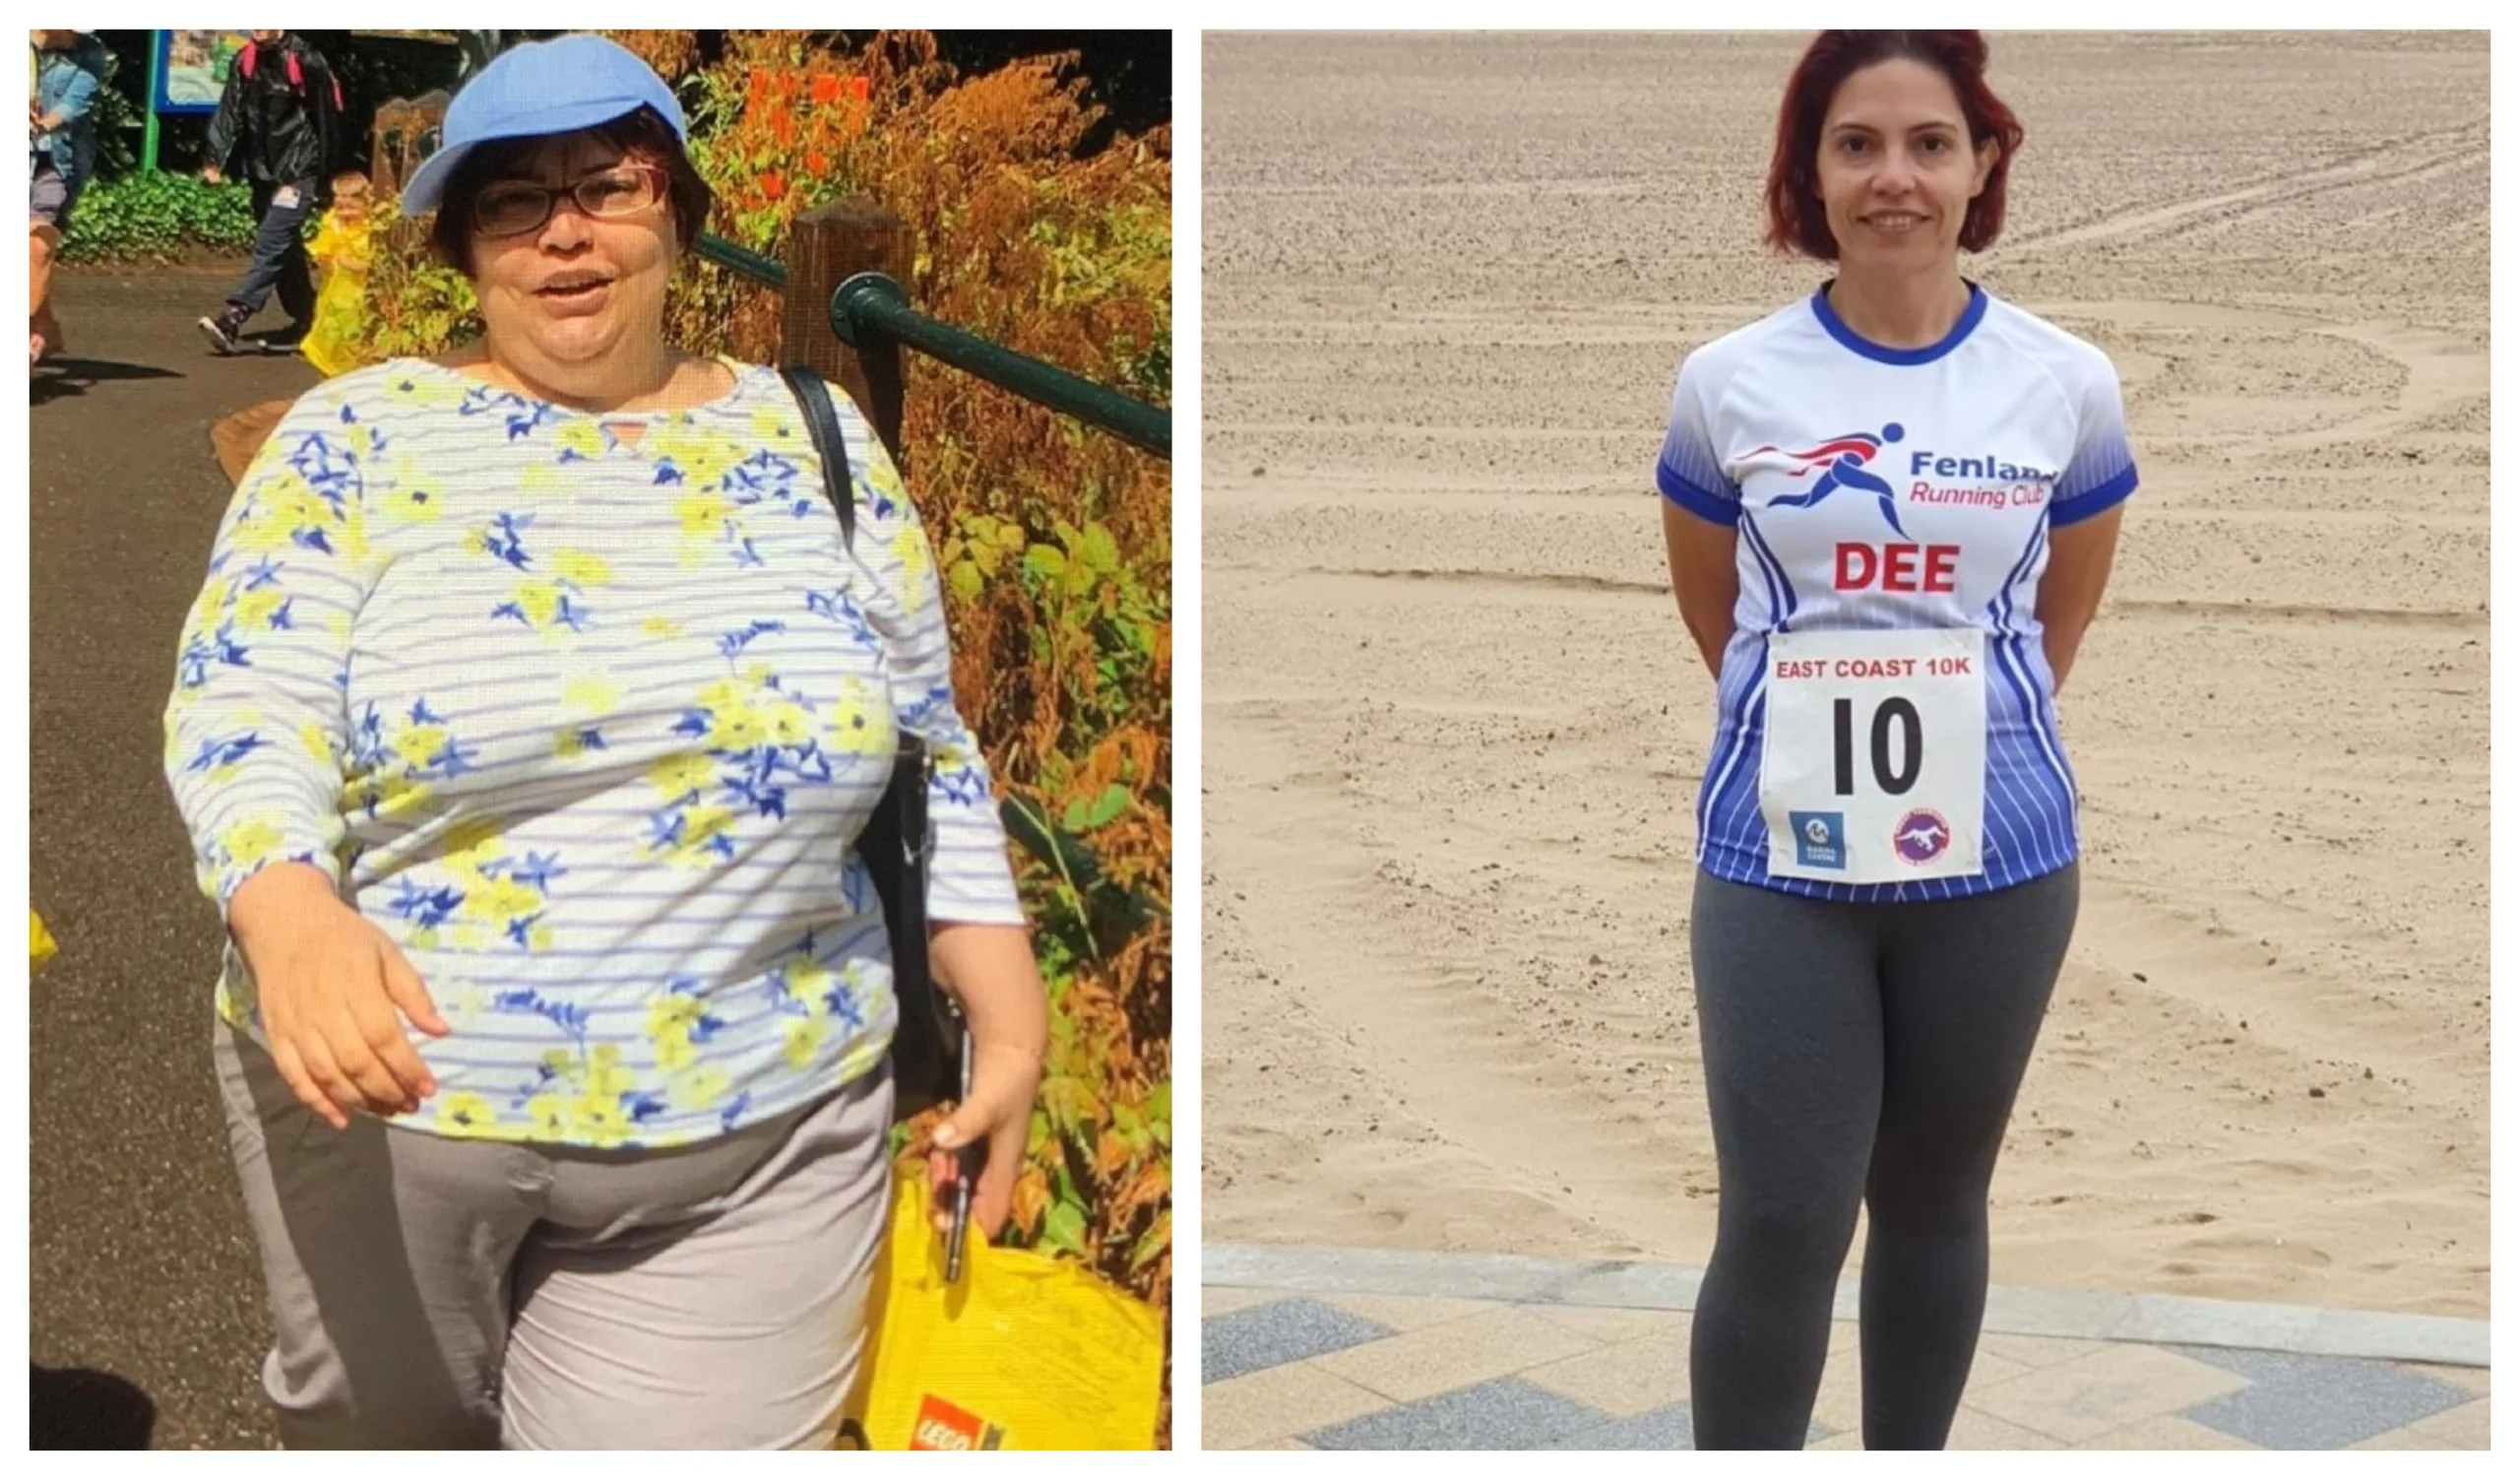 Dee Ucuncu: before and after photos show her remarkable weight loss achievement. PHOTO: Fenland District Council